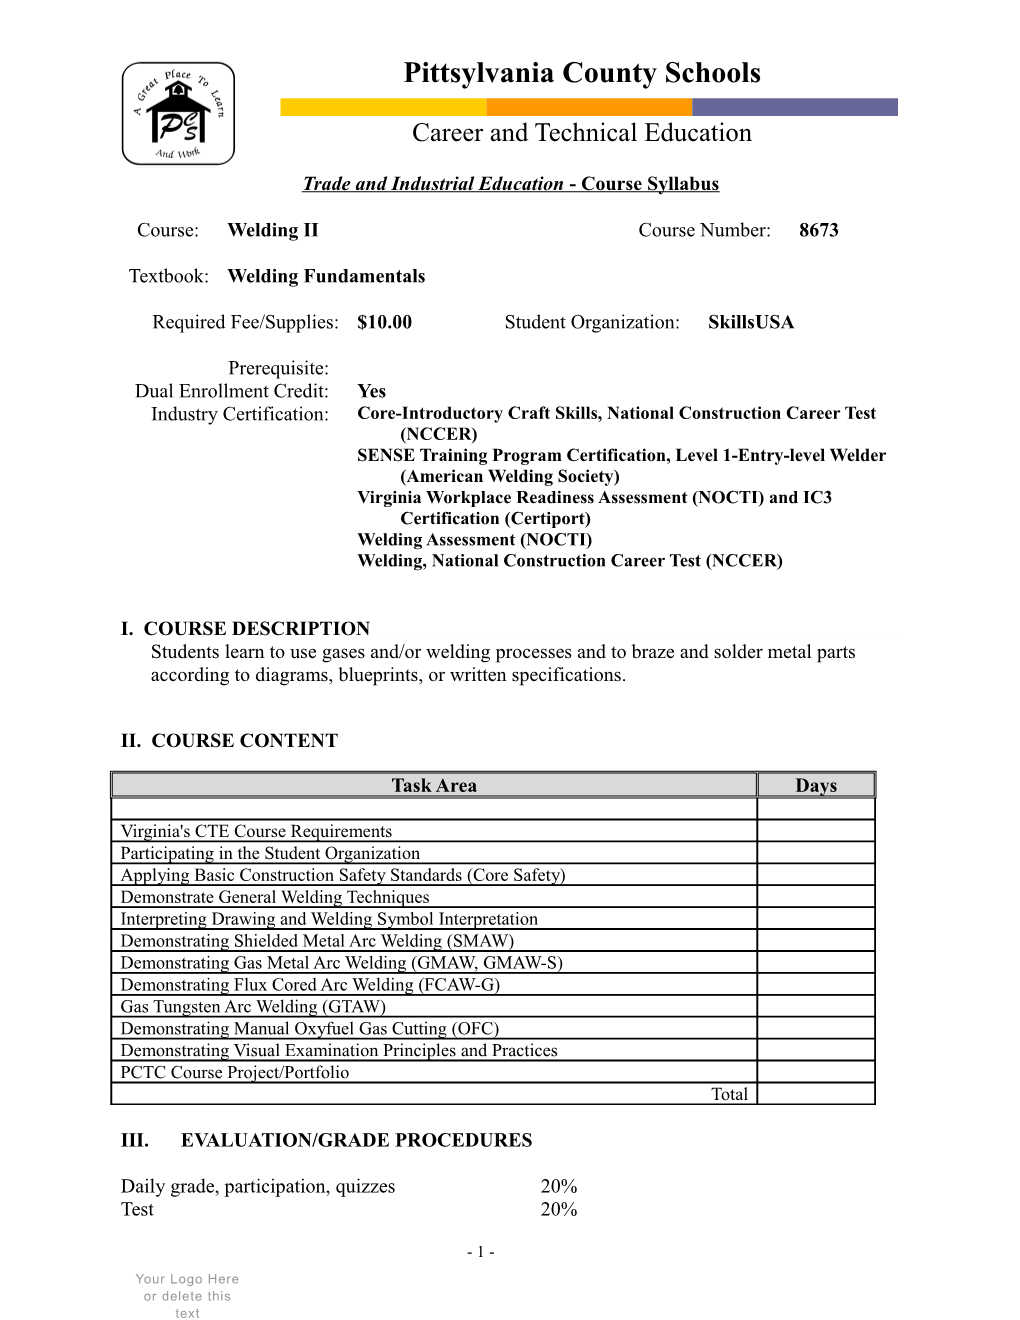 Agricultural Education Course Syllabus s2